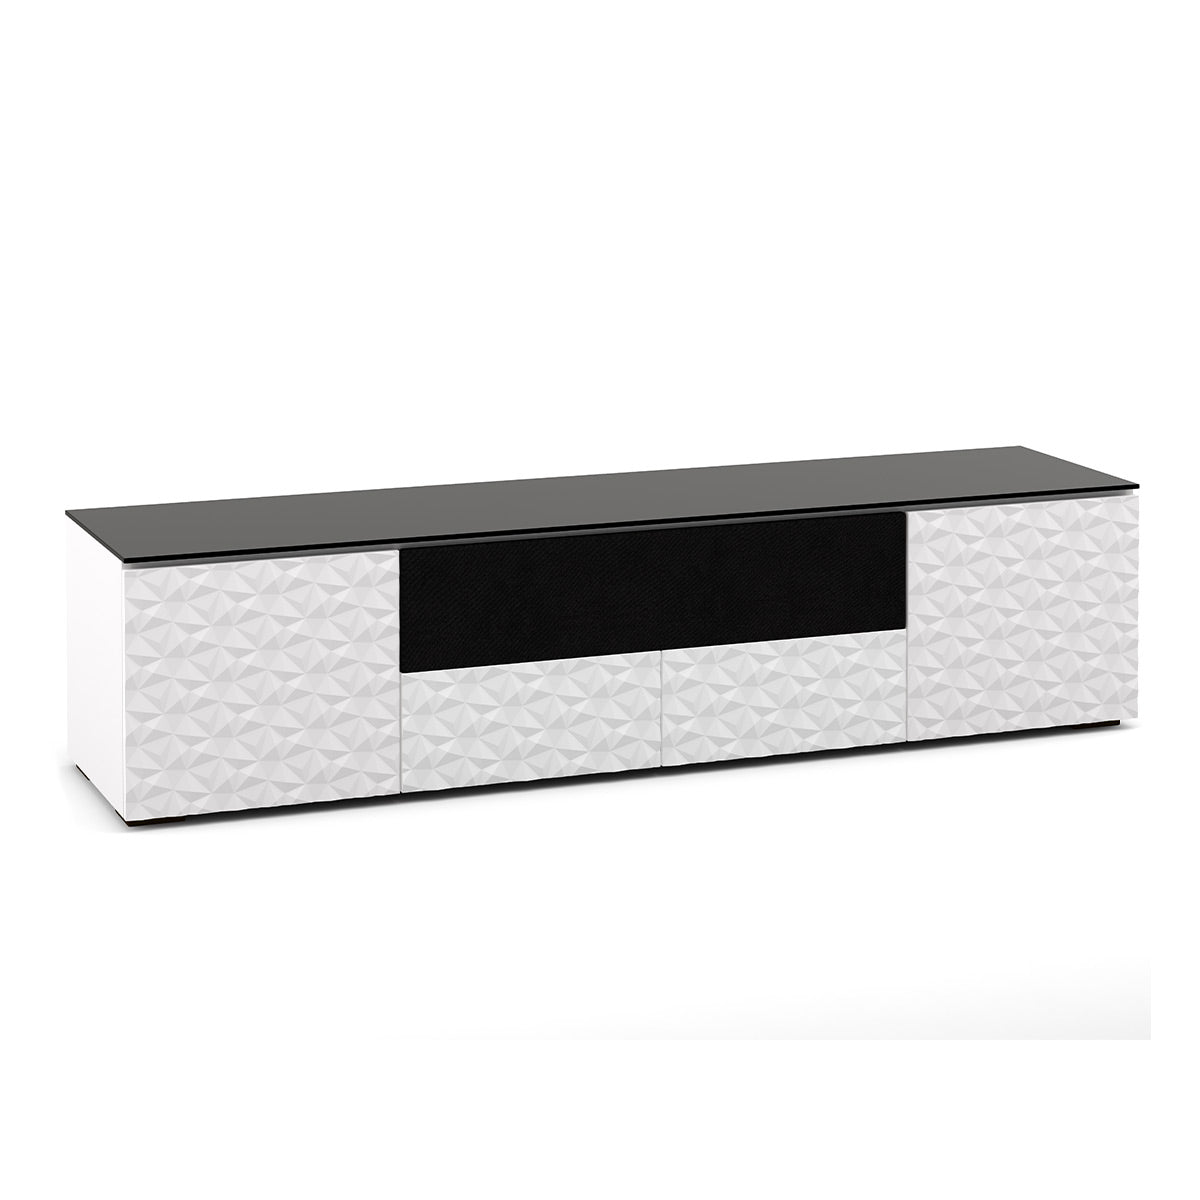 Salamander Chameleon Collection Milan 245 Quad Speaker Integrated Cabinet (Geometric White with Black Glass Top)